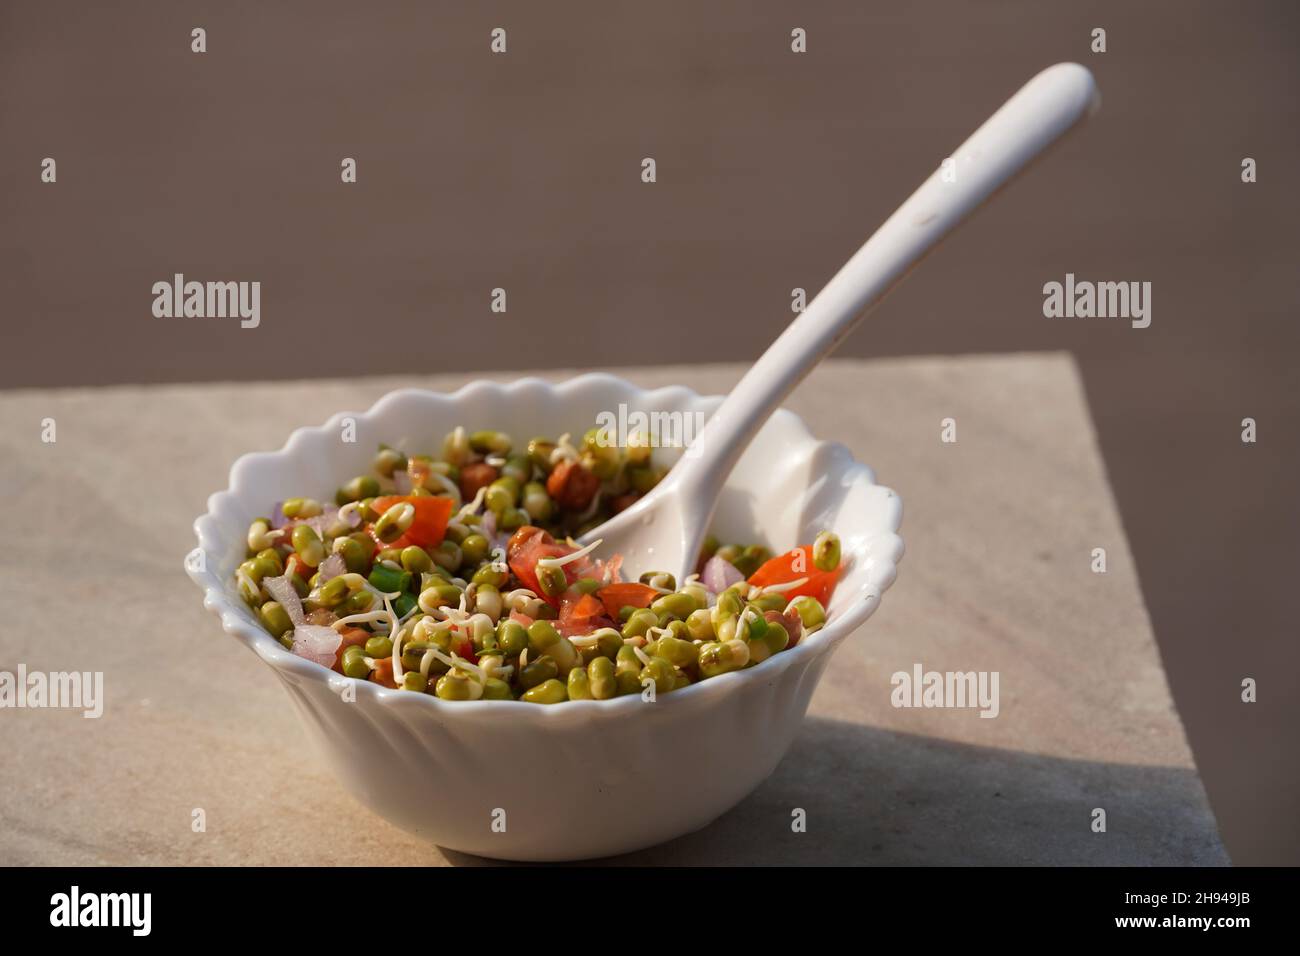 sprouts Morning food image HD Stock Photo